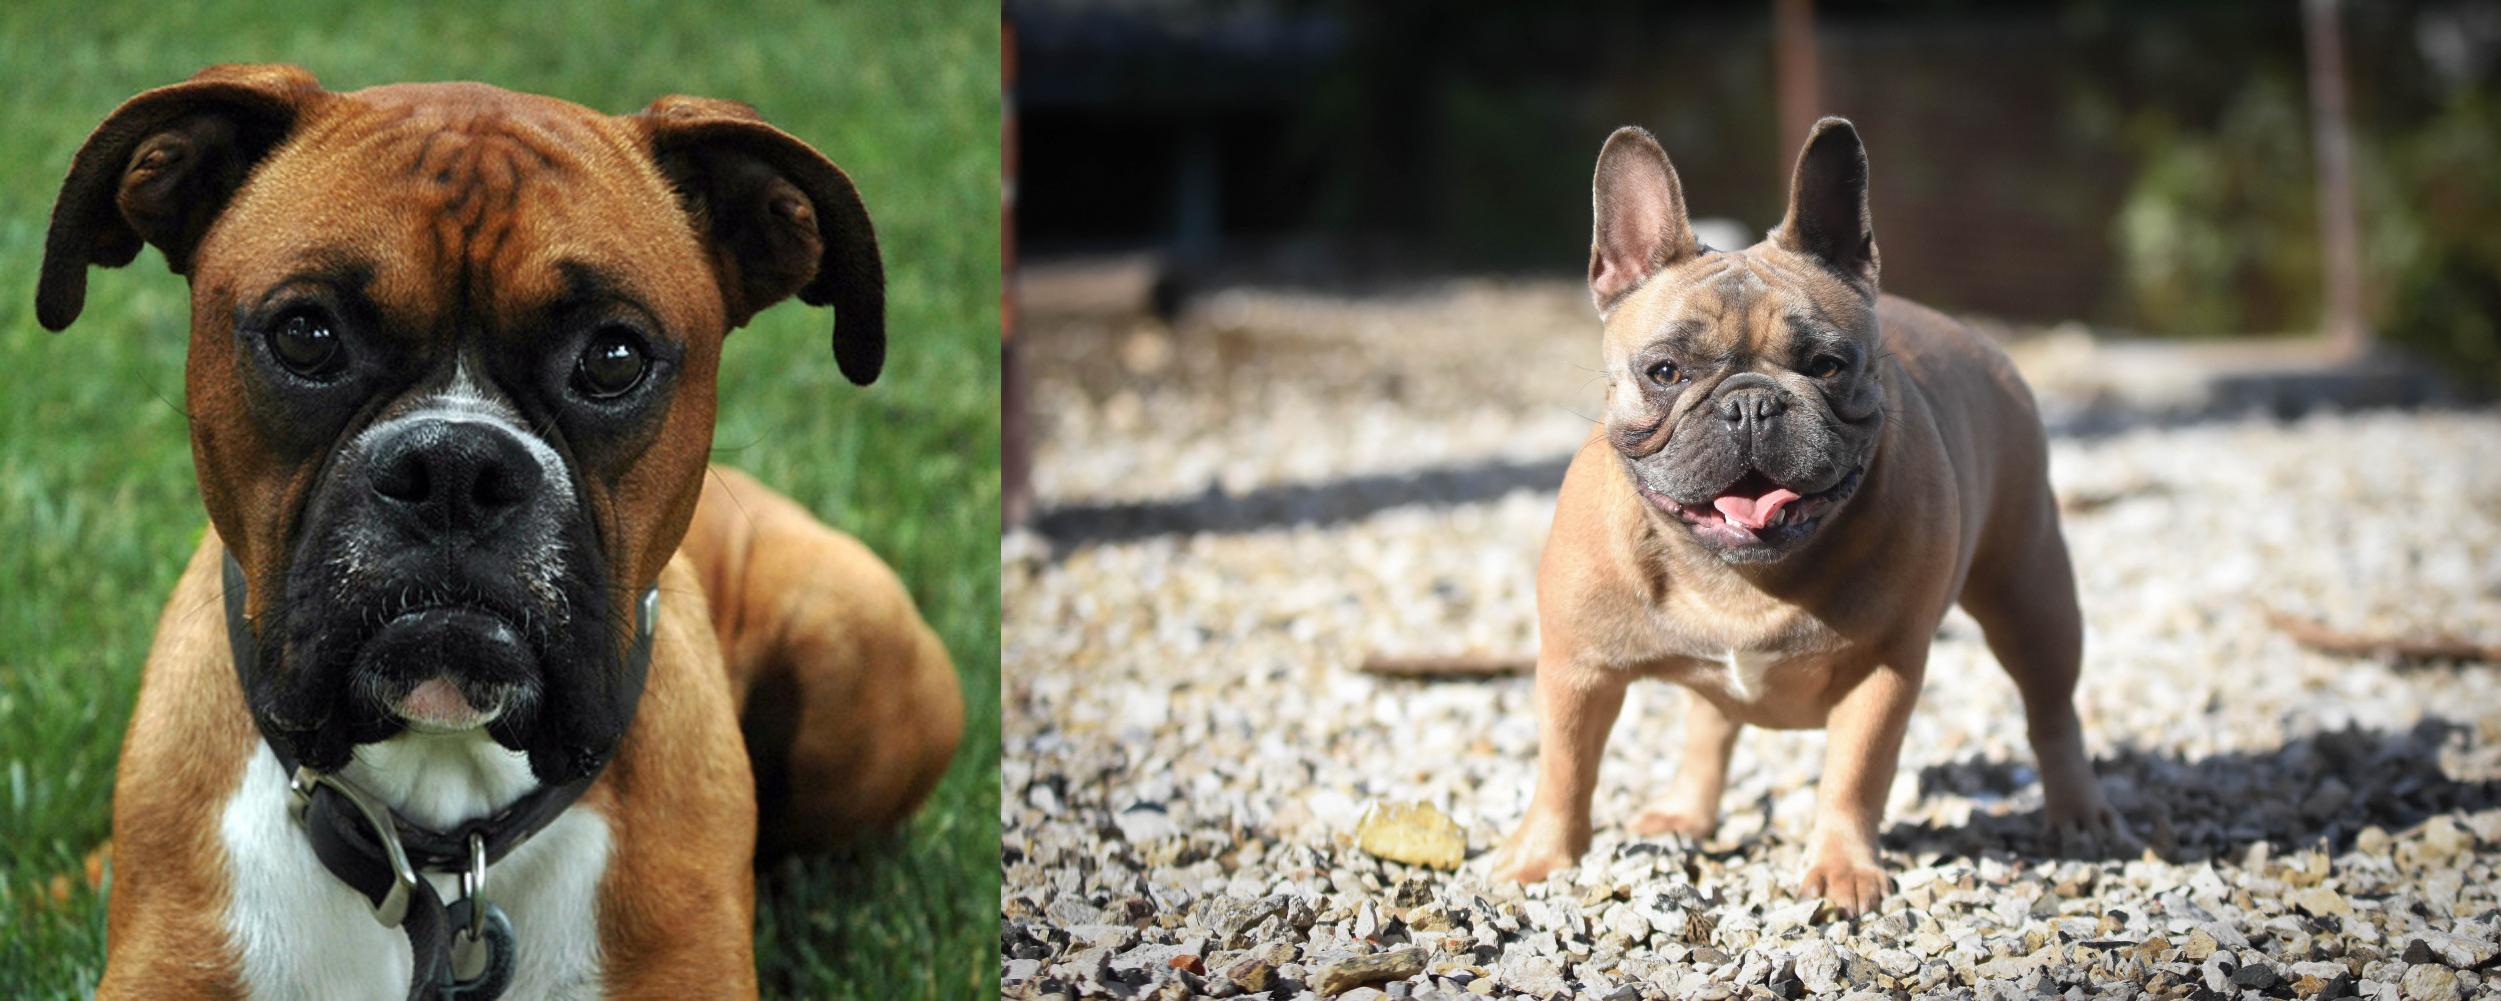 breeders 53+ French Bulldog Mix Breed Reviews Pin on love Boxers French Bul...